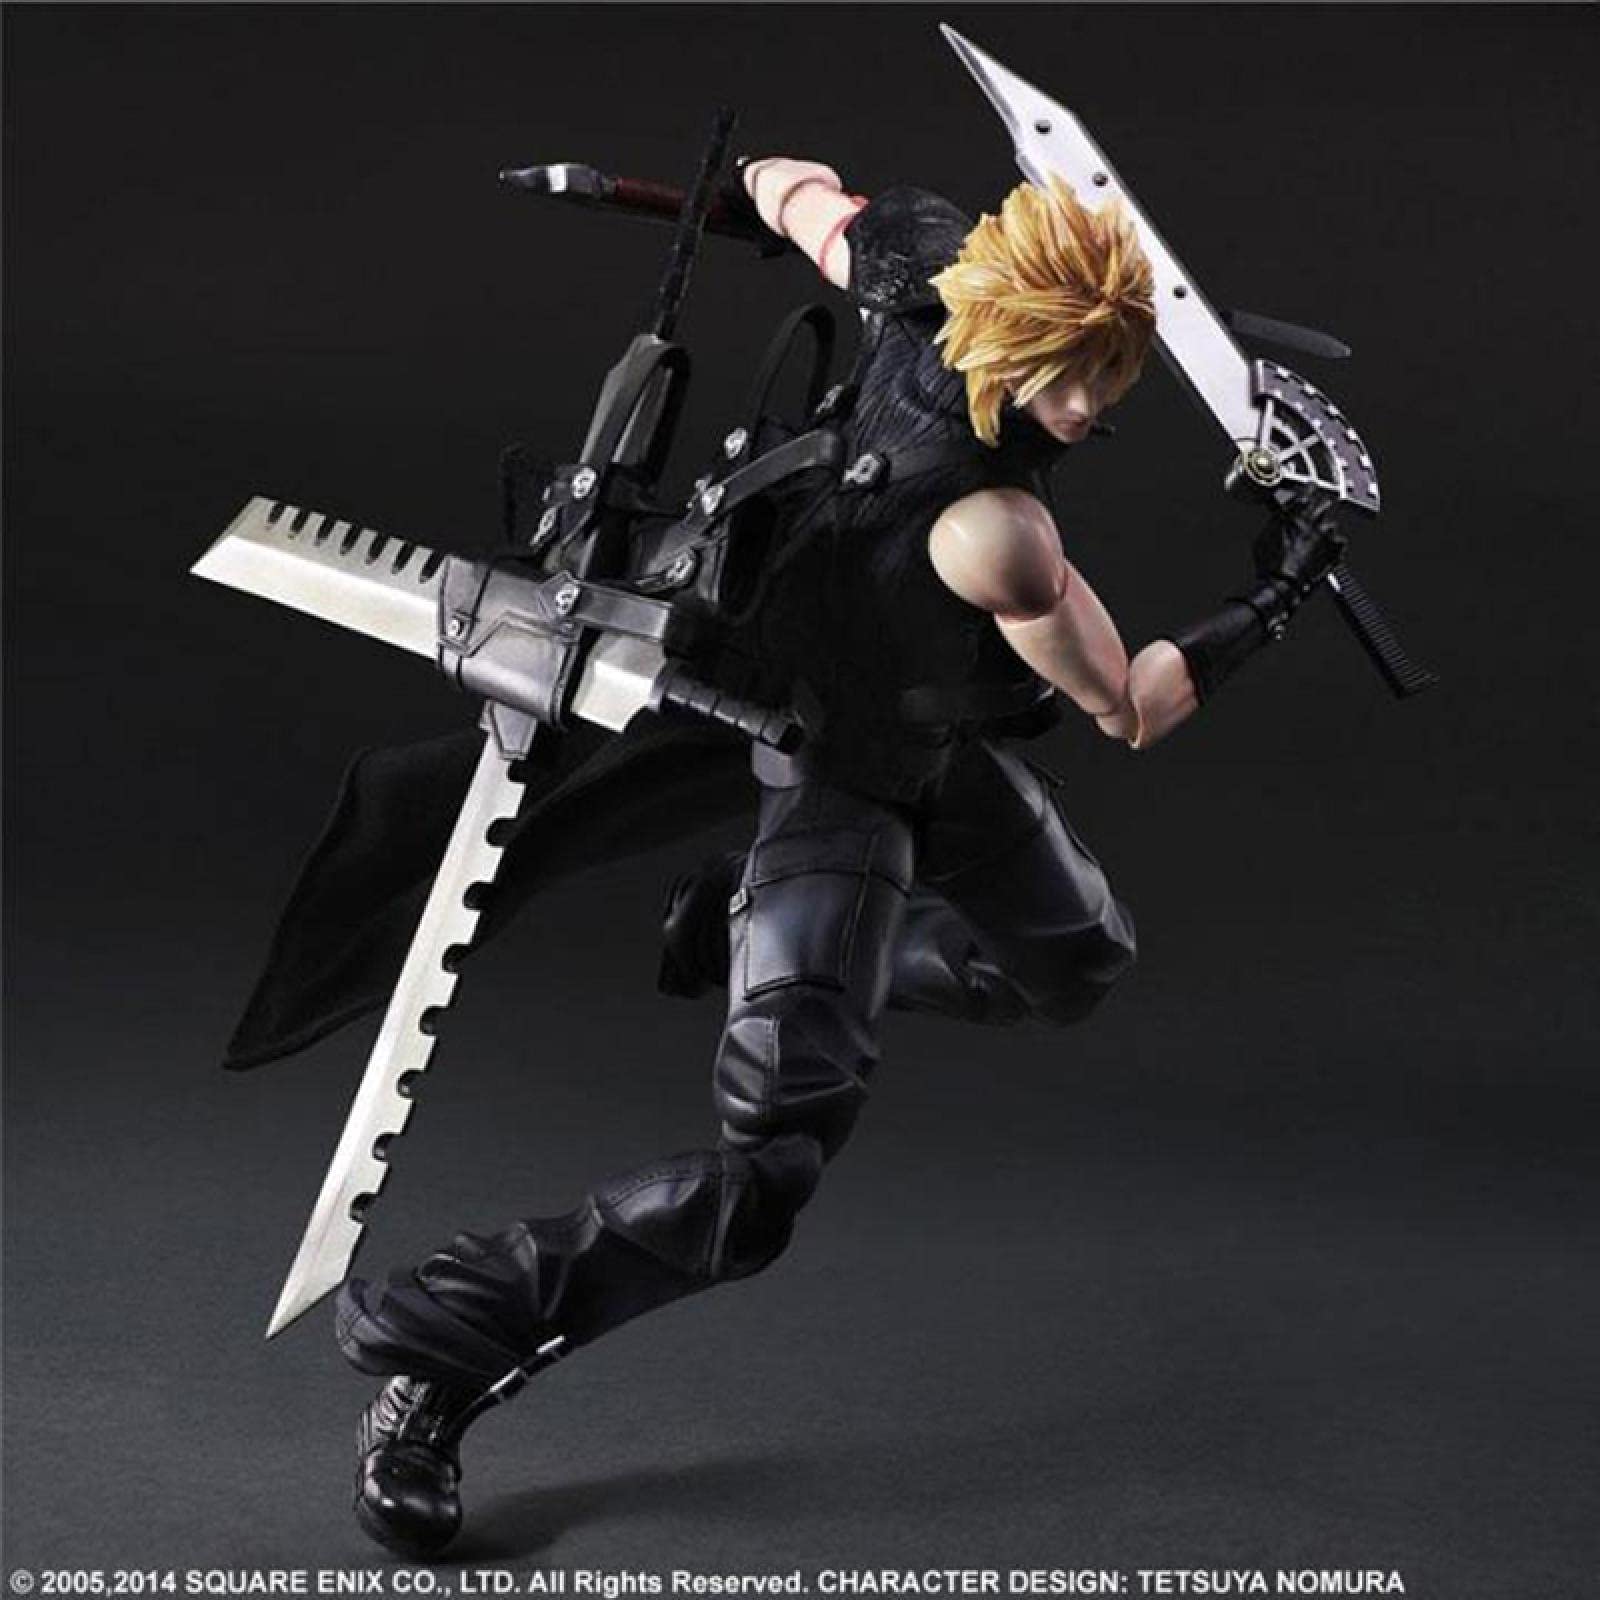 Play Arts Final Fantasy VII Cloud Strife PVC Action Figure Anime Cloud Strife Collection PVC Model Toys Doll 28cm